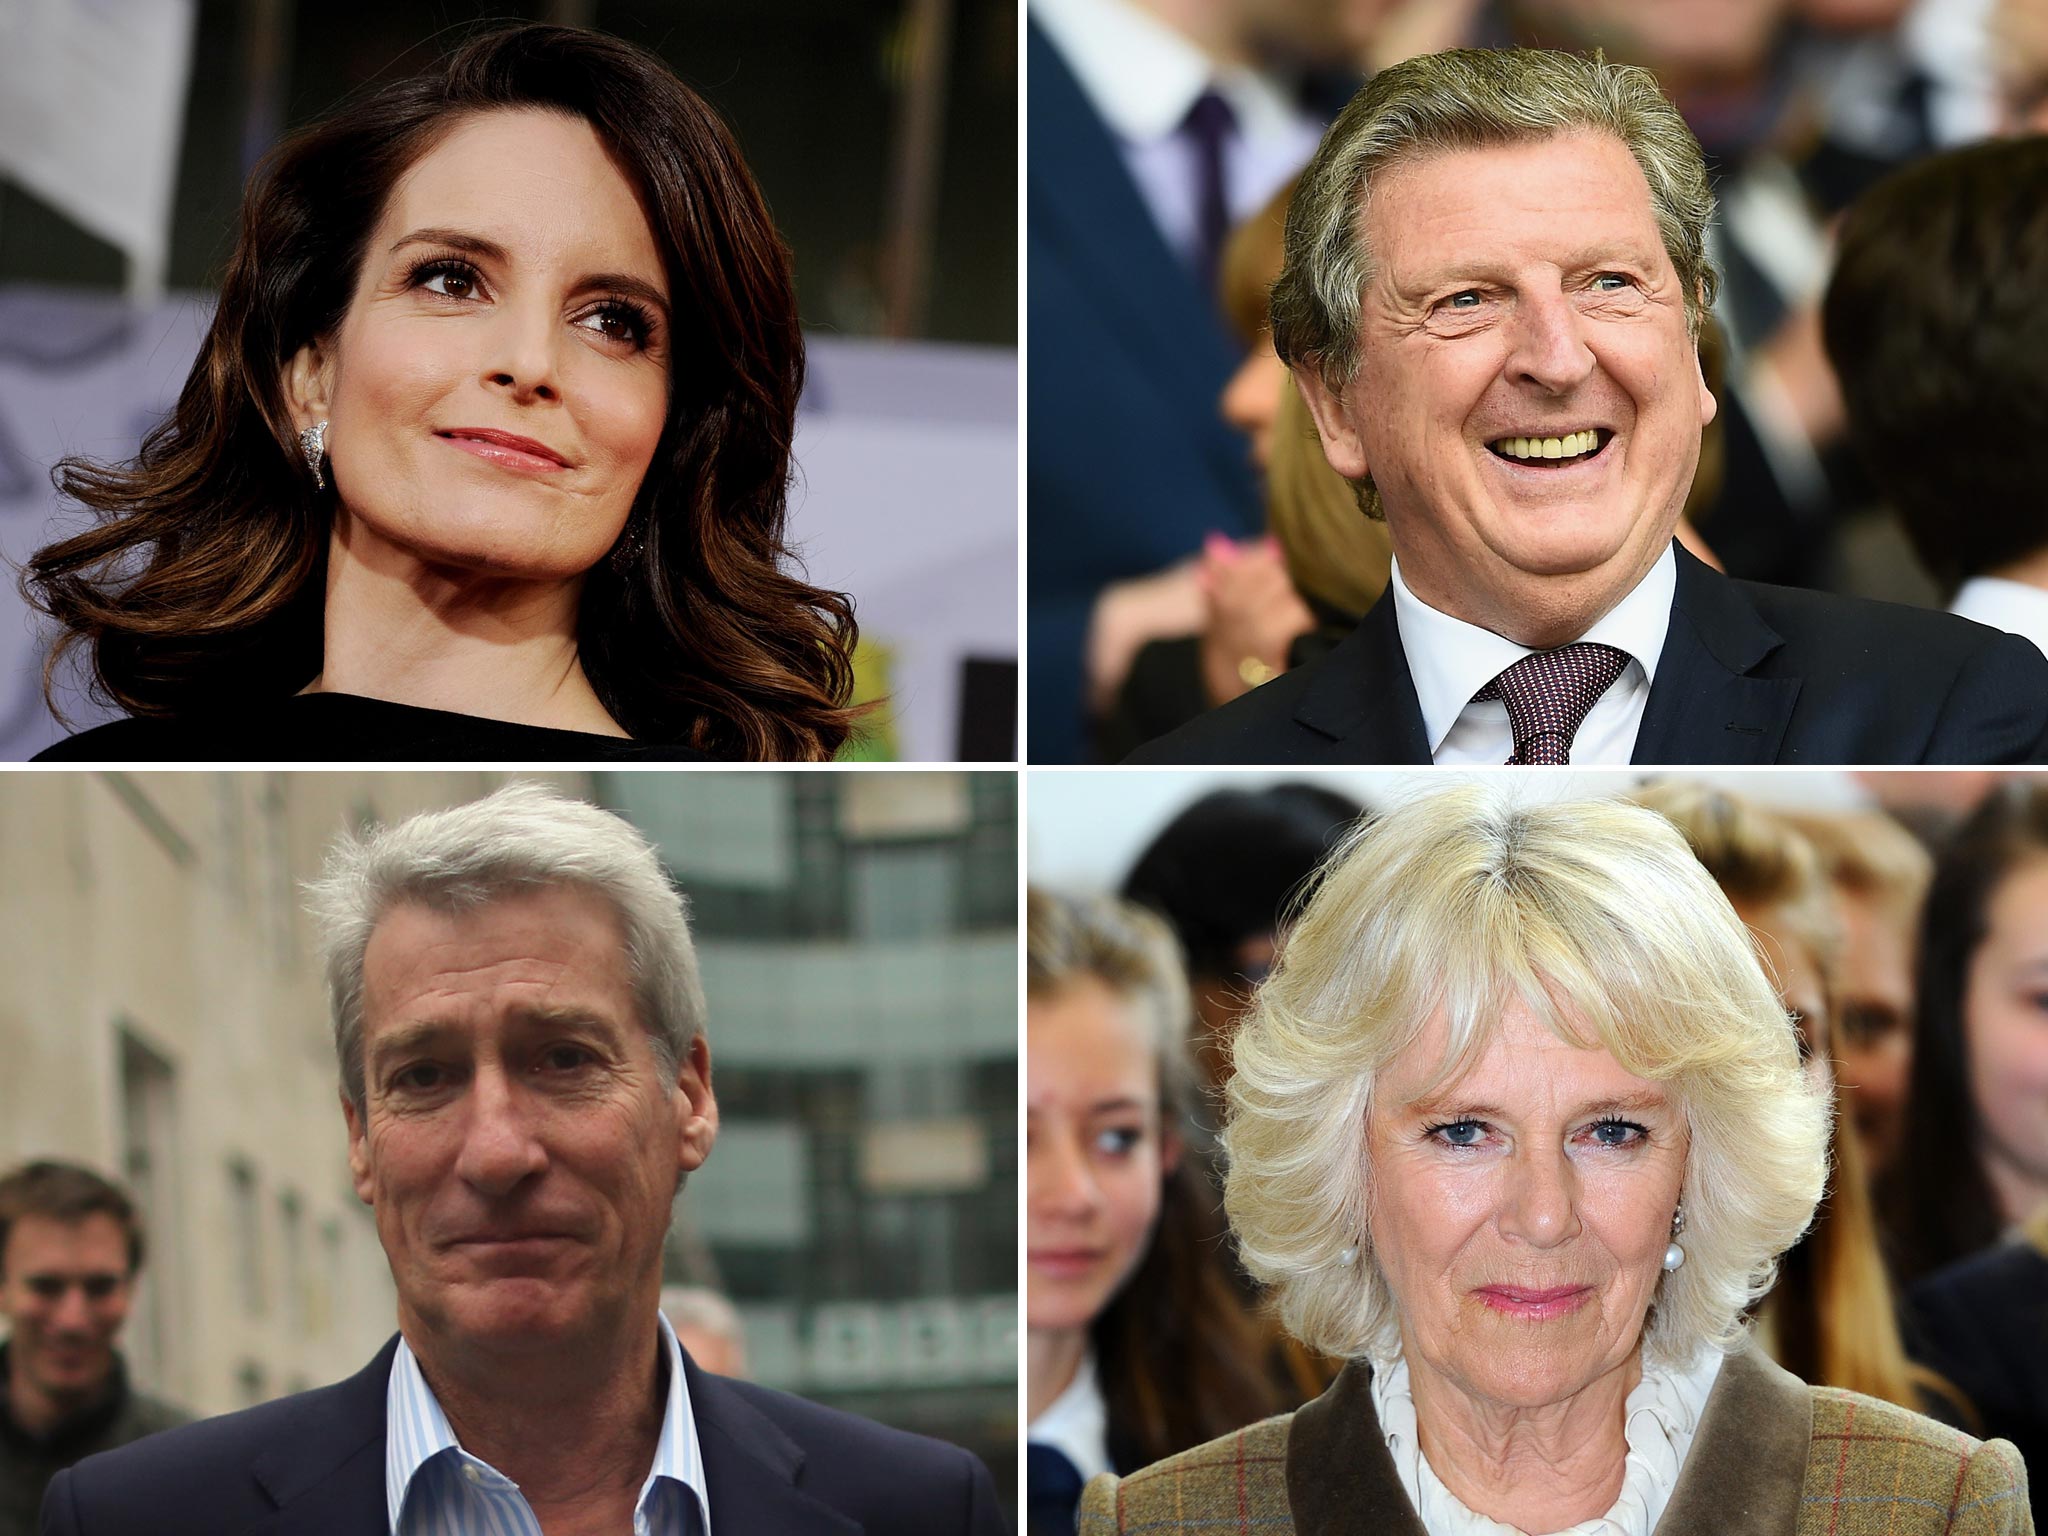 Celebrities who we'd like to see on Twitter (clockwise from top left): Tina Fey, Roy Hodgson, the Duchess of Cornwall and Jeremy Paxman